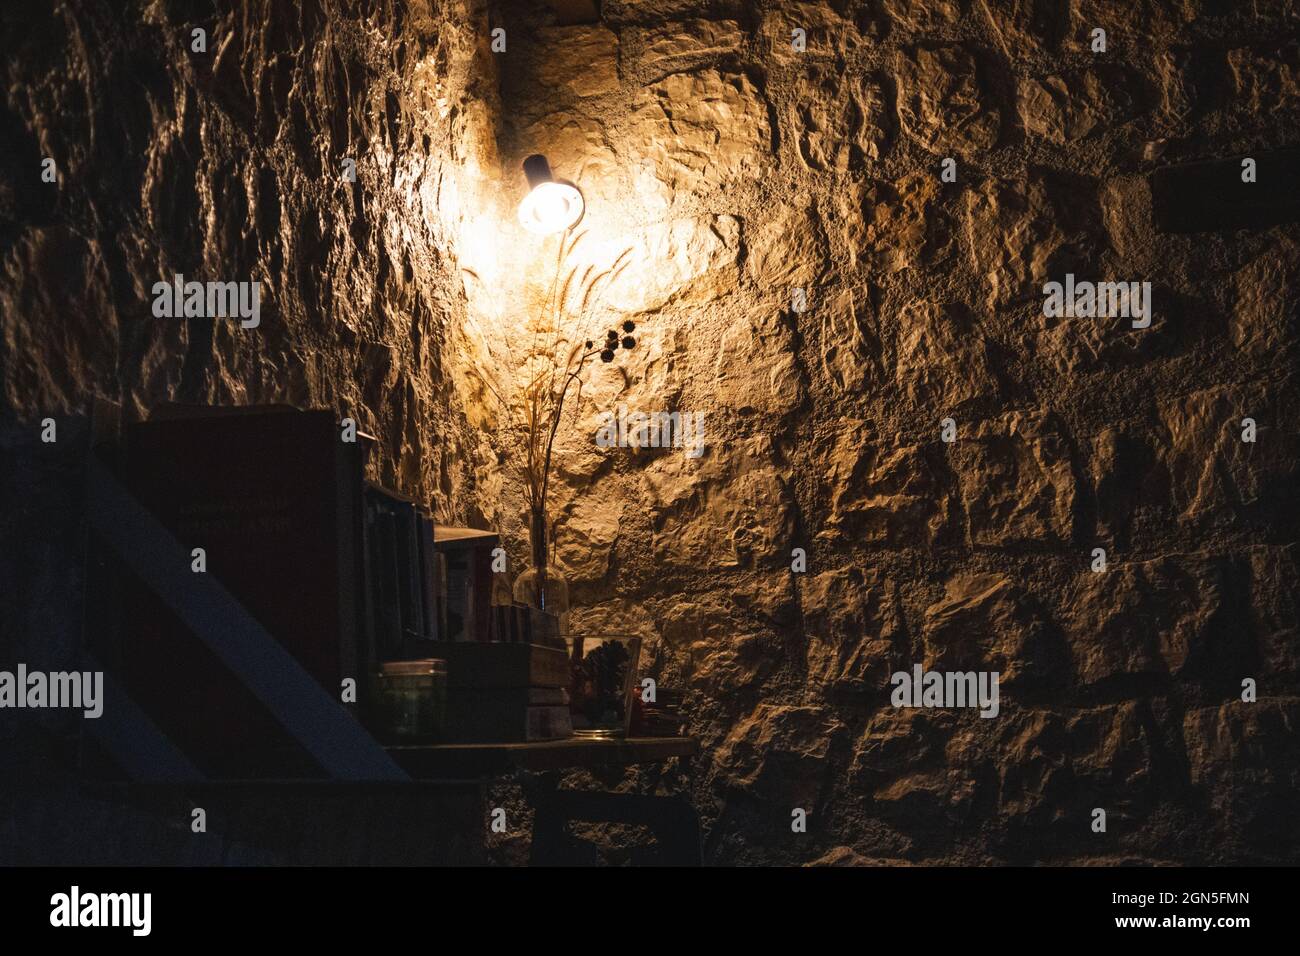 Warm cozy lamp in corner on bookshelf in dark room with stone walls. Greek guest house evening rest area, decor interior elements Stock Photo